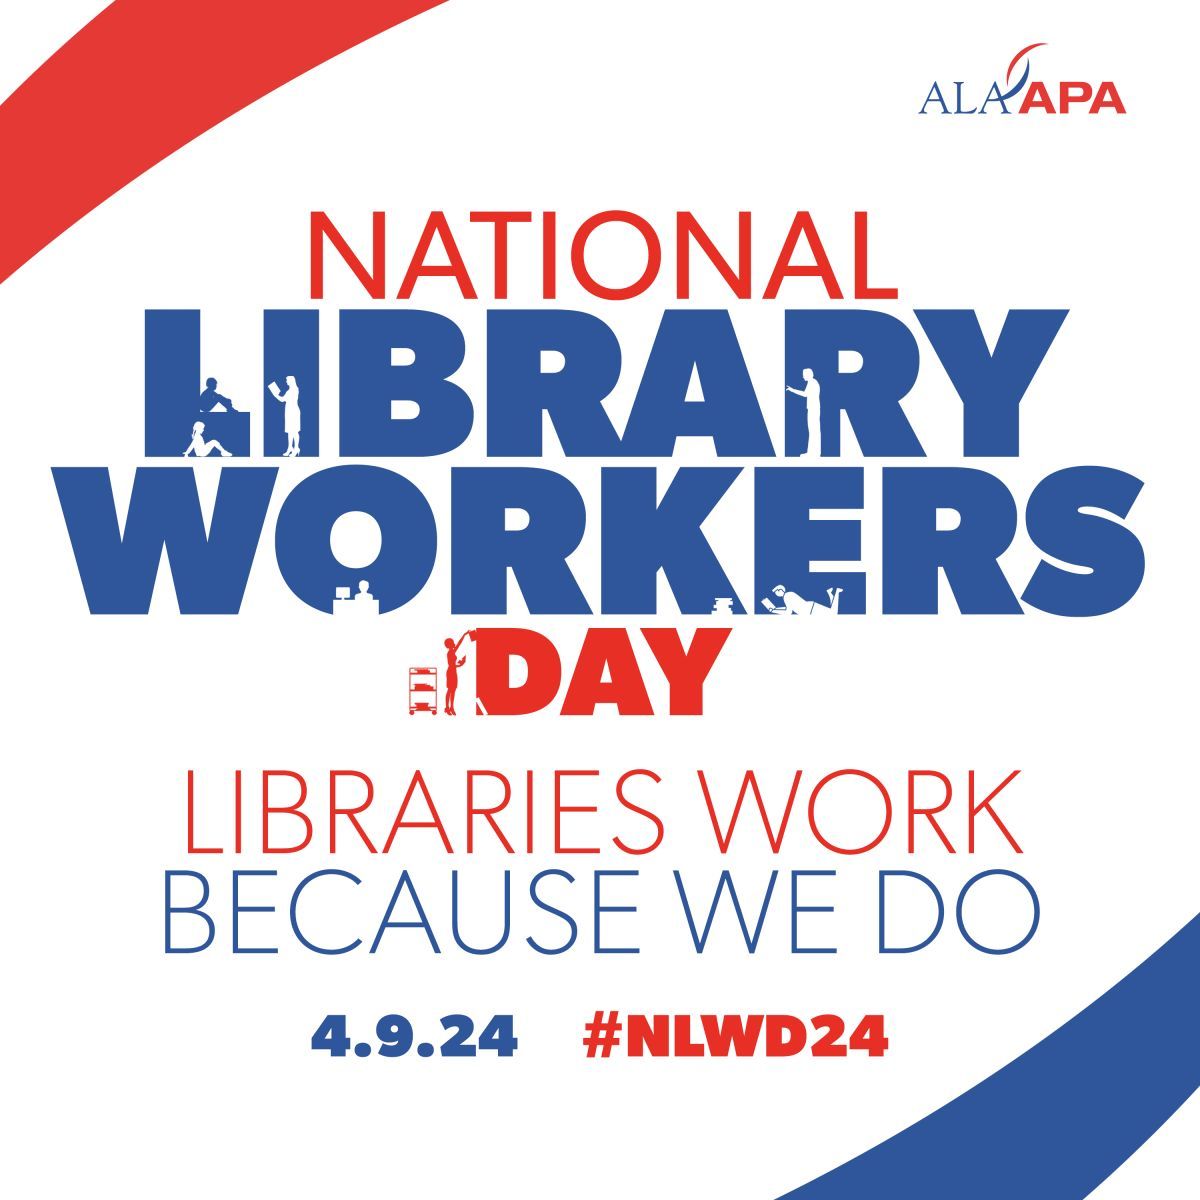 It's National Library Workers Day! We want to say a big thank you to every staff member at @SPLbuzz - we hear from the community every day about how much you mean to patrons and everyone in our city. We're so proud to support your work!